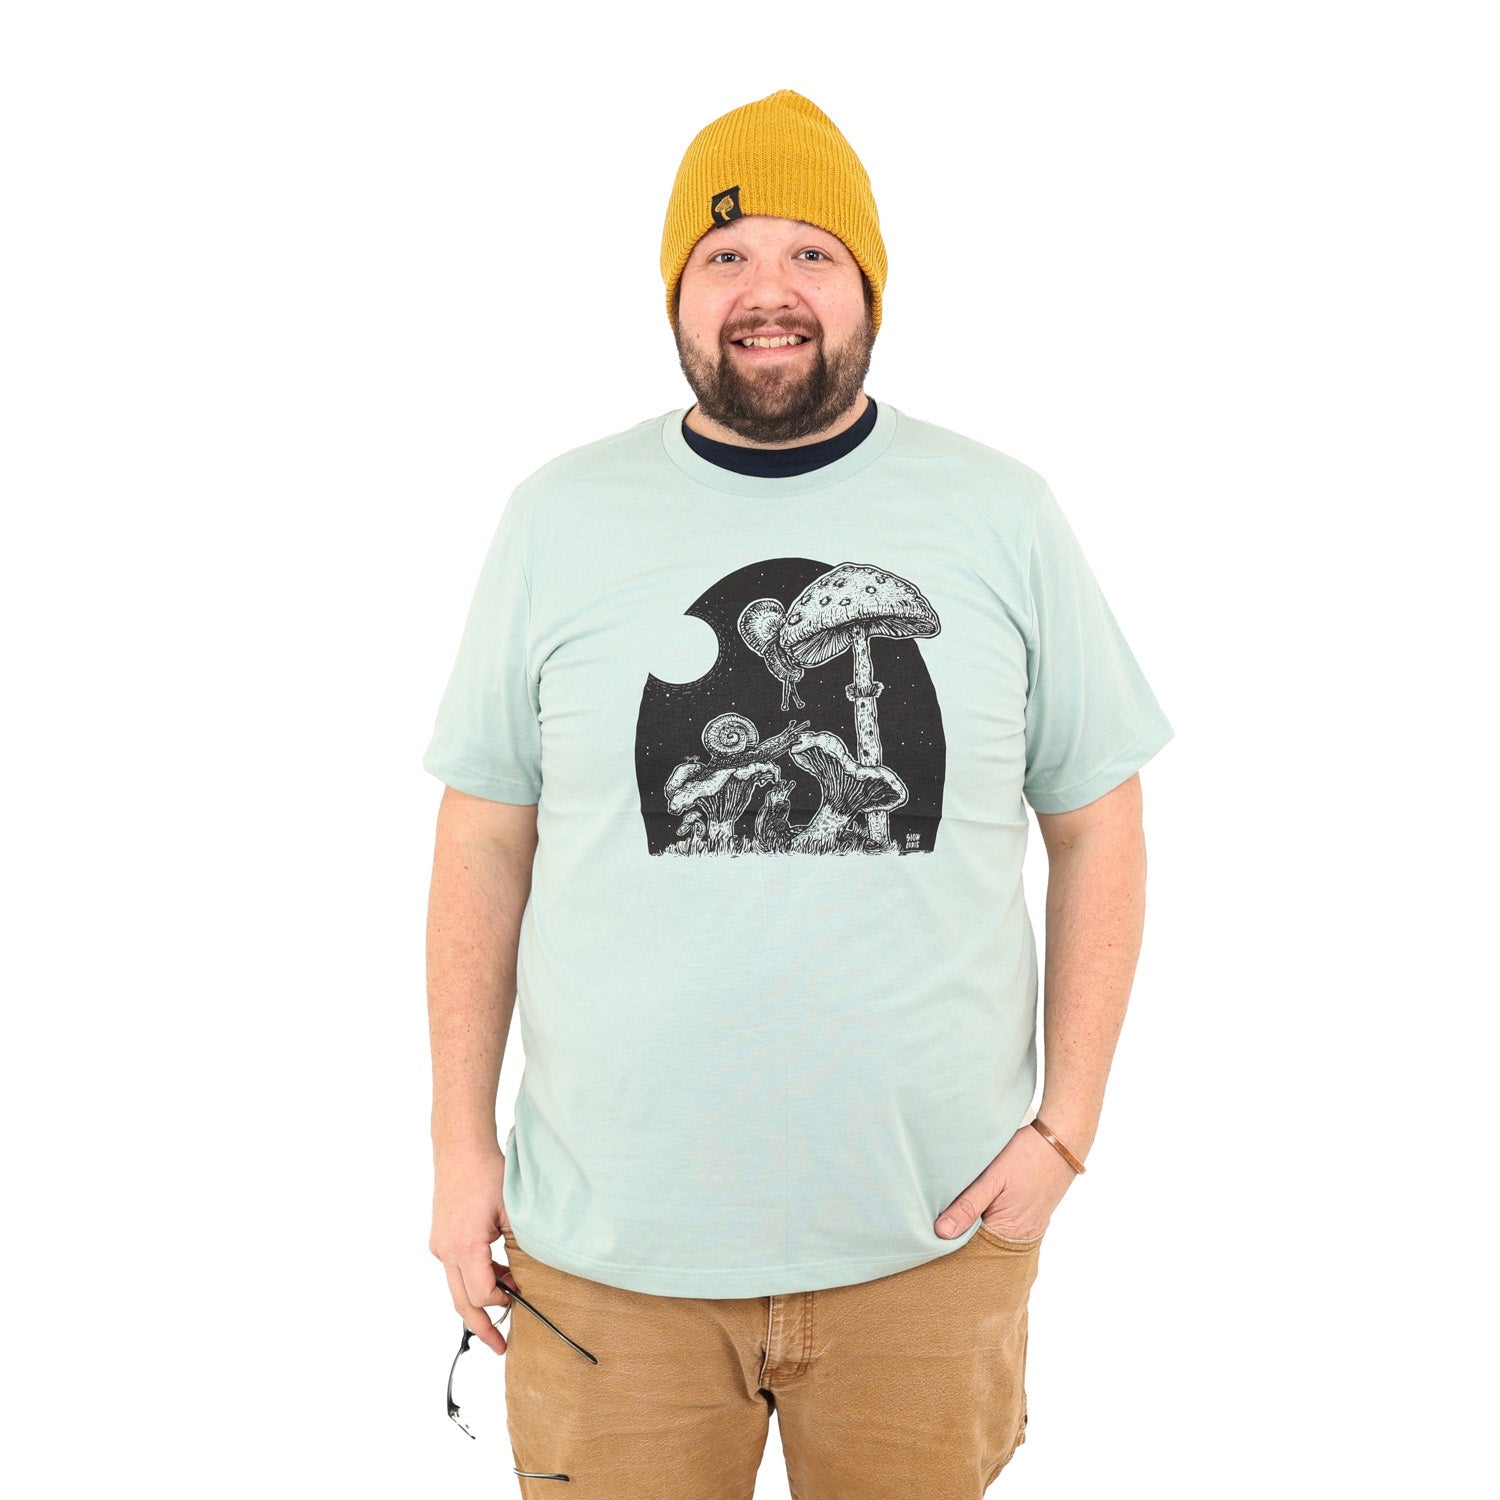 Happy guy wearing mustard beanie and light mint shirt with snails eating mushrooms in the full moon light. 